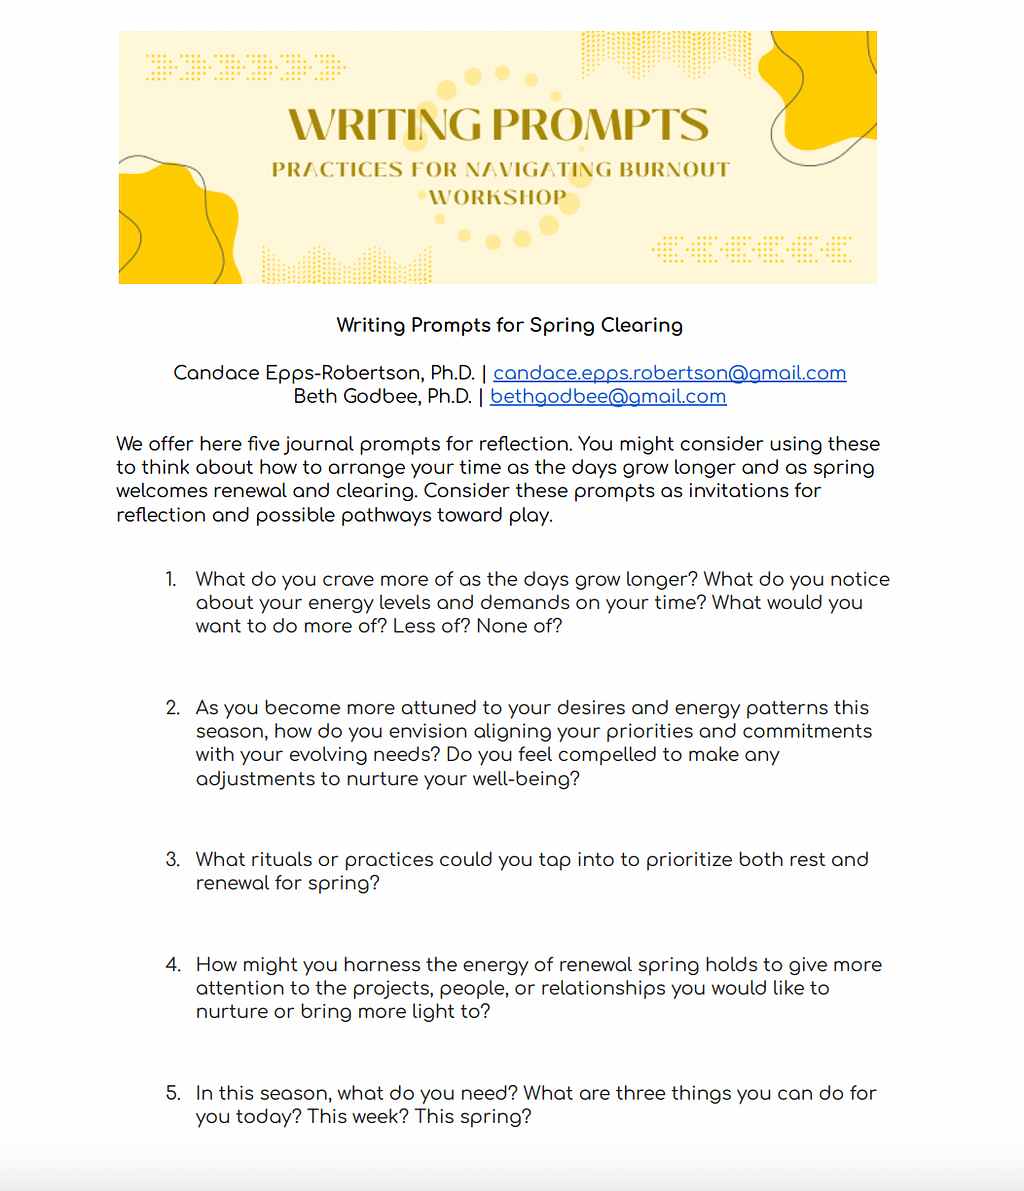 A list of writing prompts for Spring Clearing.